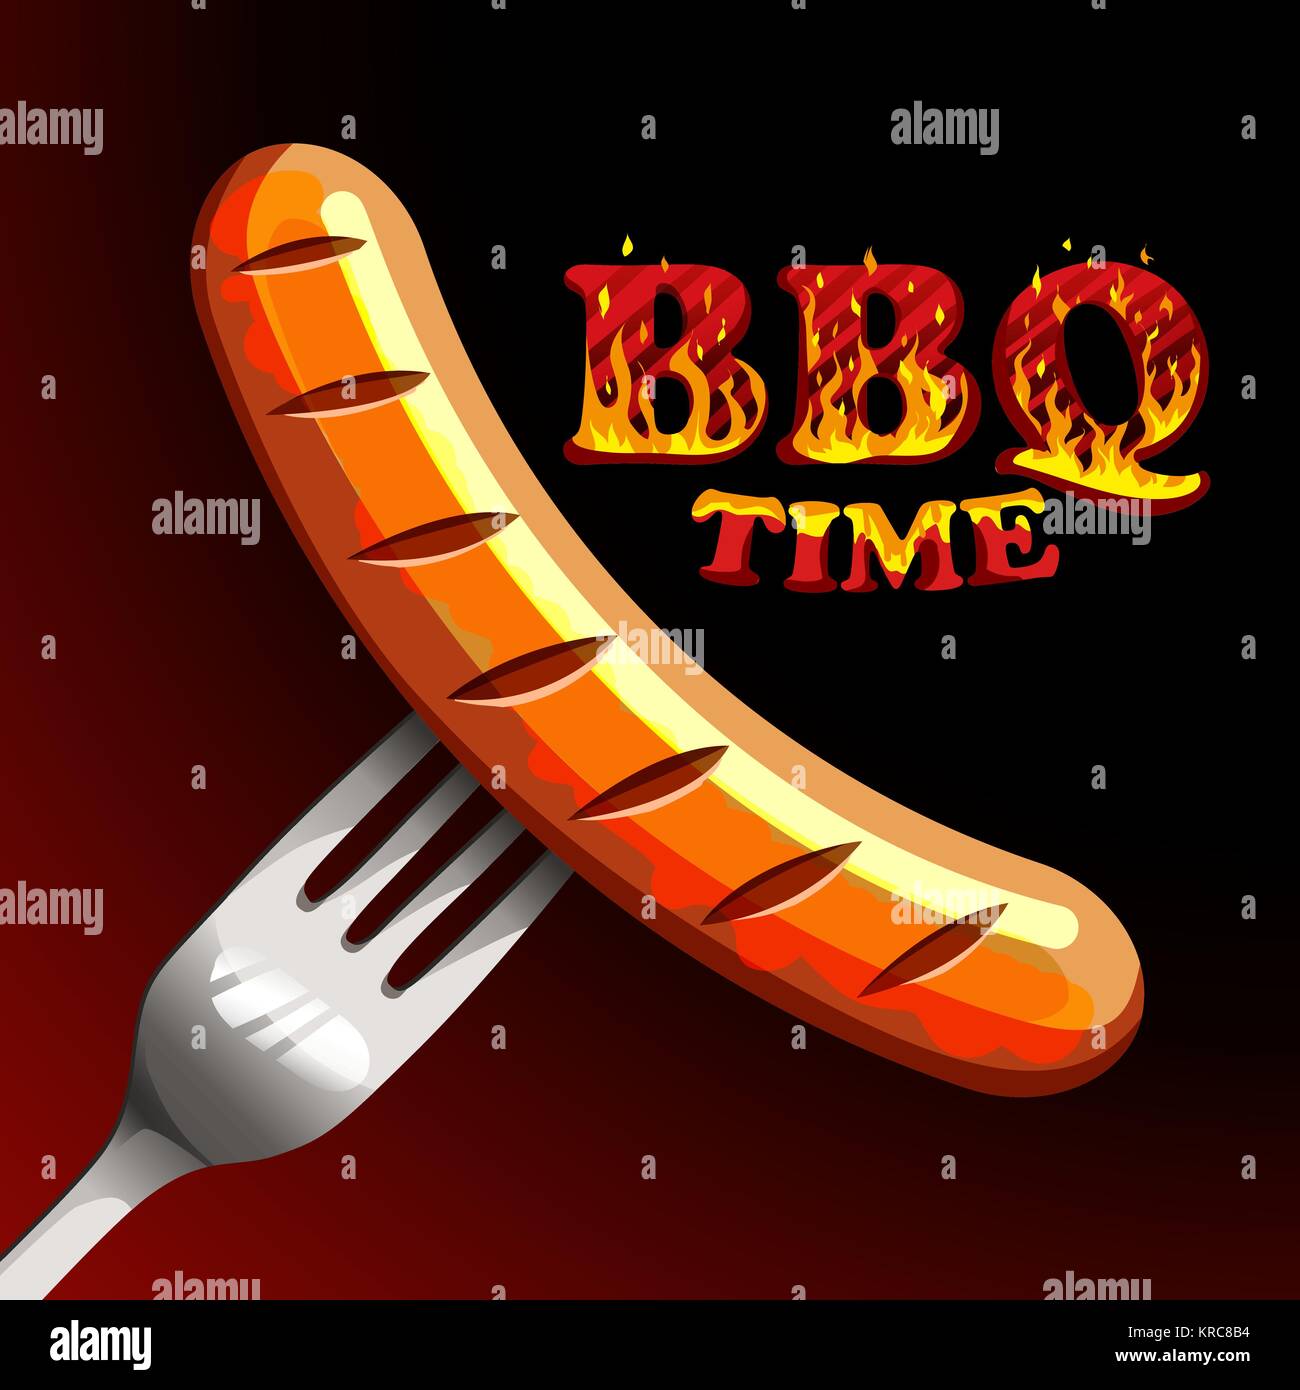 BBQ time - Photorealistic sausage on a fork. Stock Vector